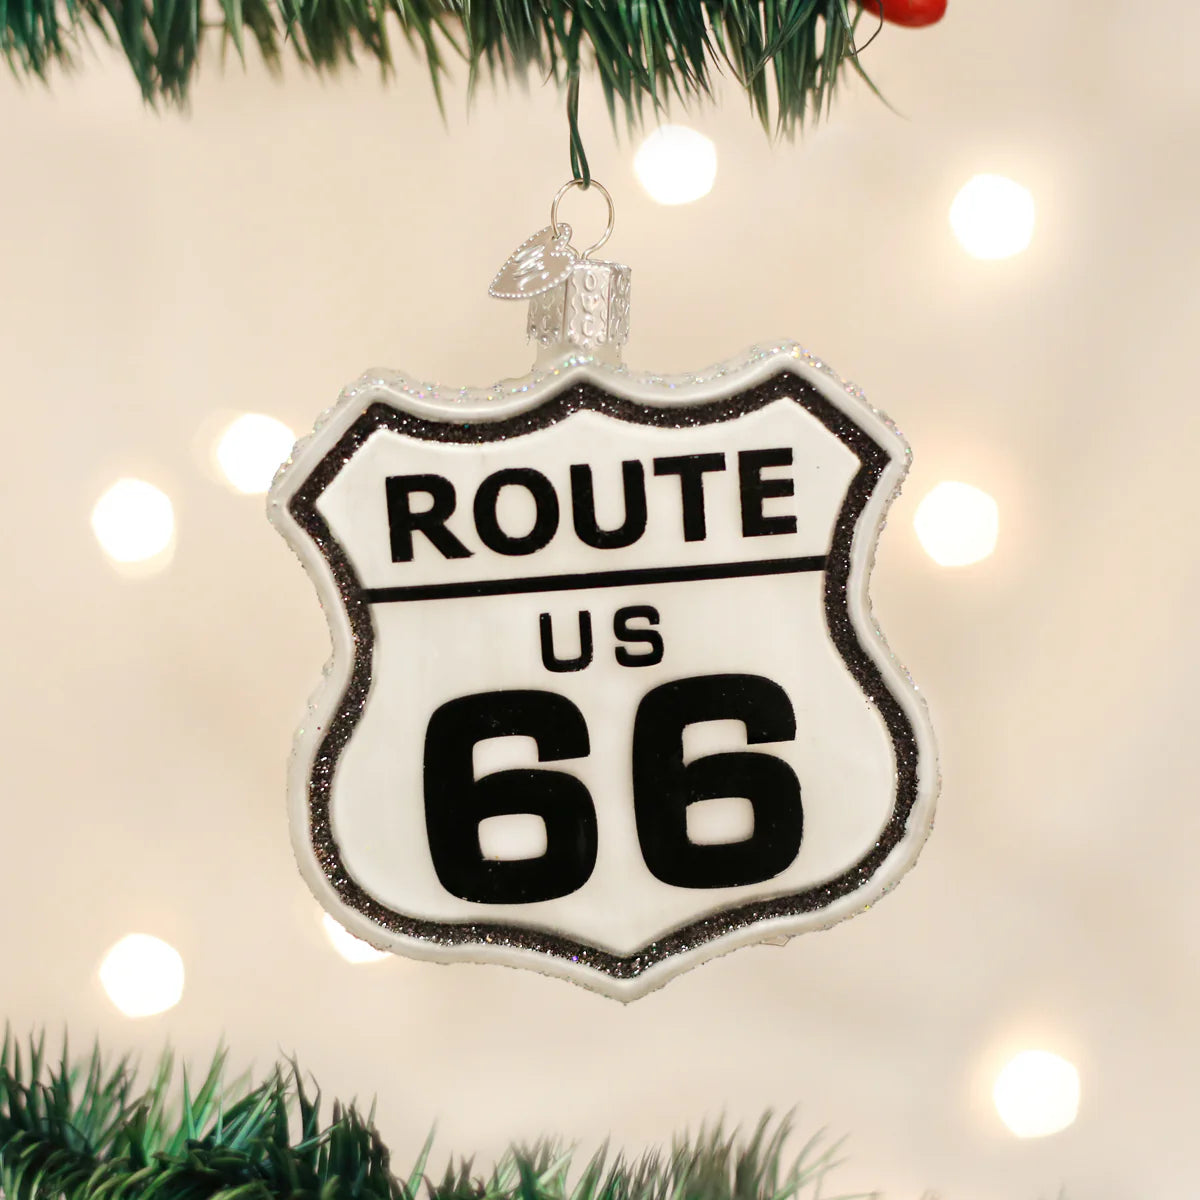 Old World Christmas - Historic Route Sign Ornament